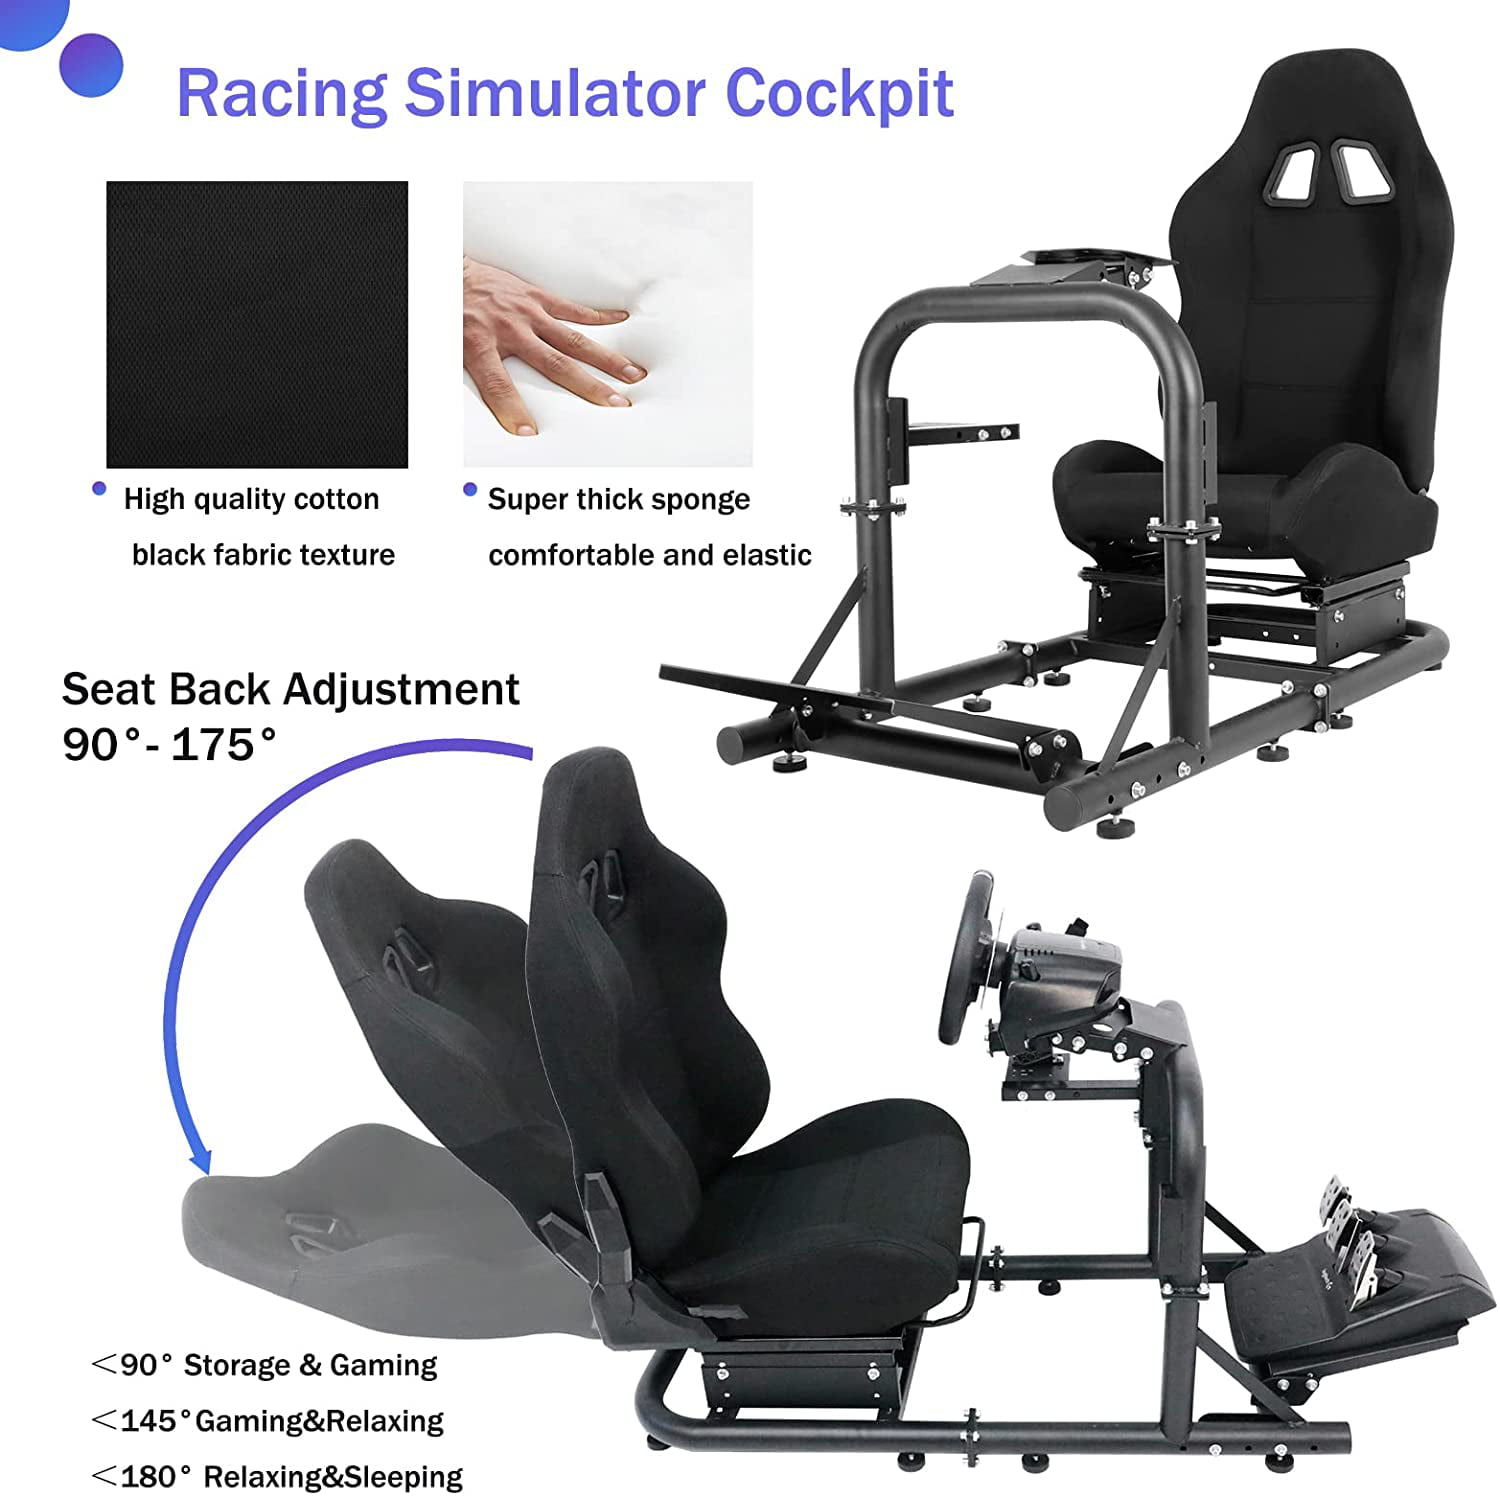  Slendor Racing Steering Wheel Stand for Logitech G920, G25, G27,  G29 Wheel, Gaming Wheel Stand Driving Simulator Cockpit Pedal and Shifters  Not Included. : Video Games